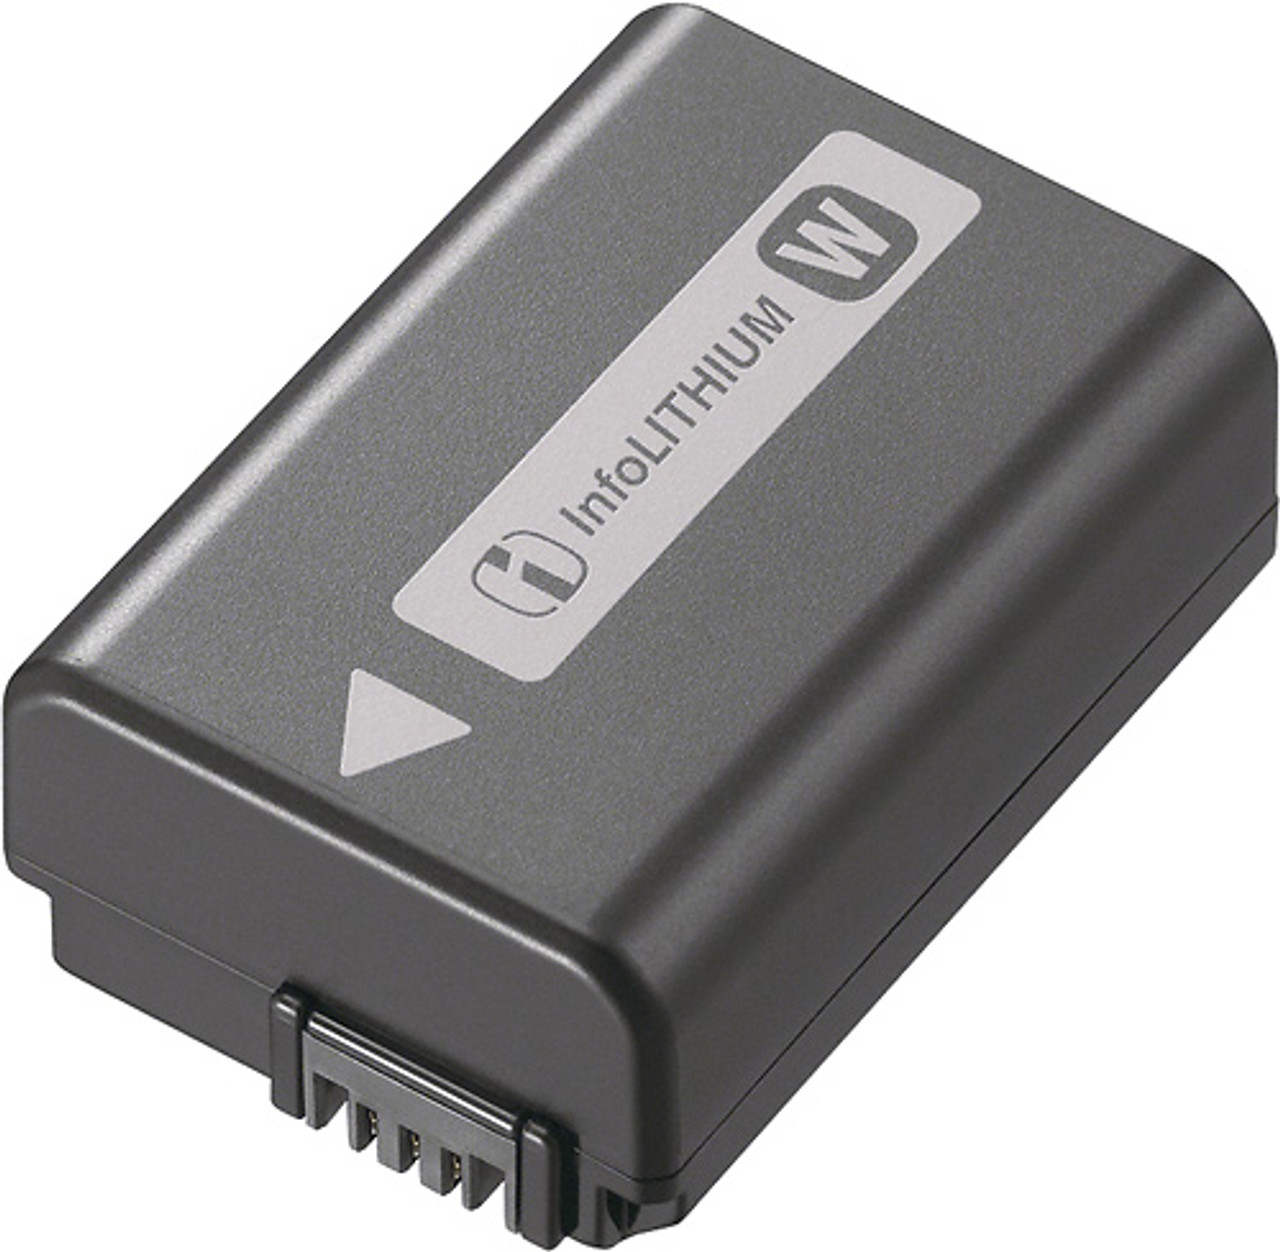 Sony - Rechargeable Lithium-Ion Battery for Sony NP-FW50